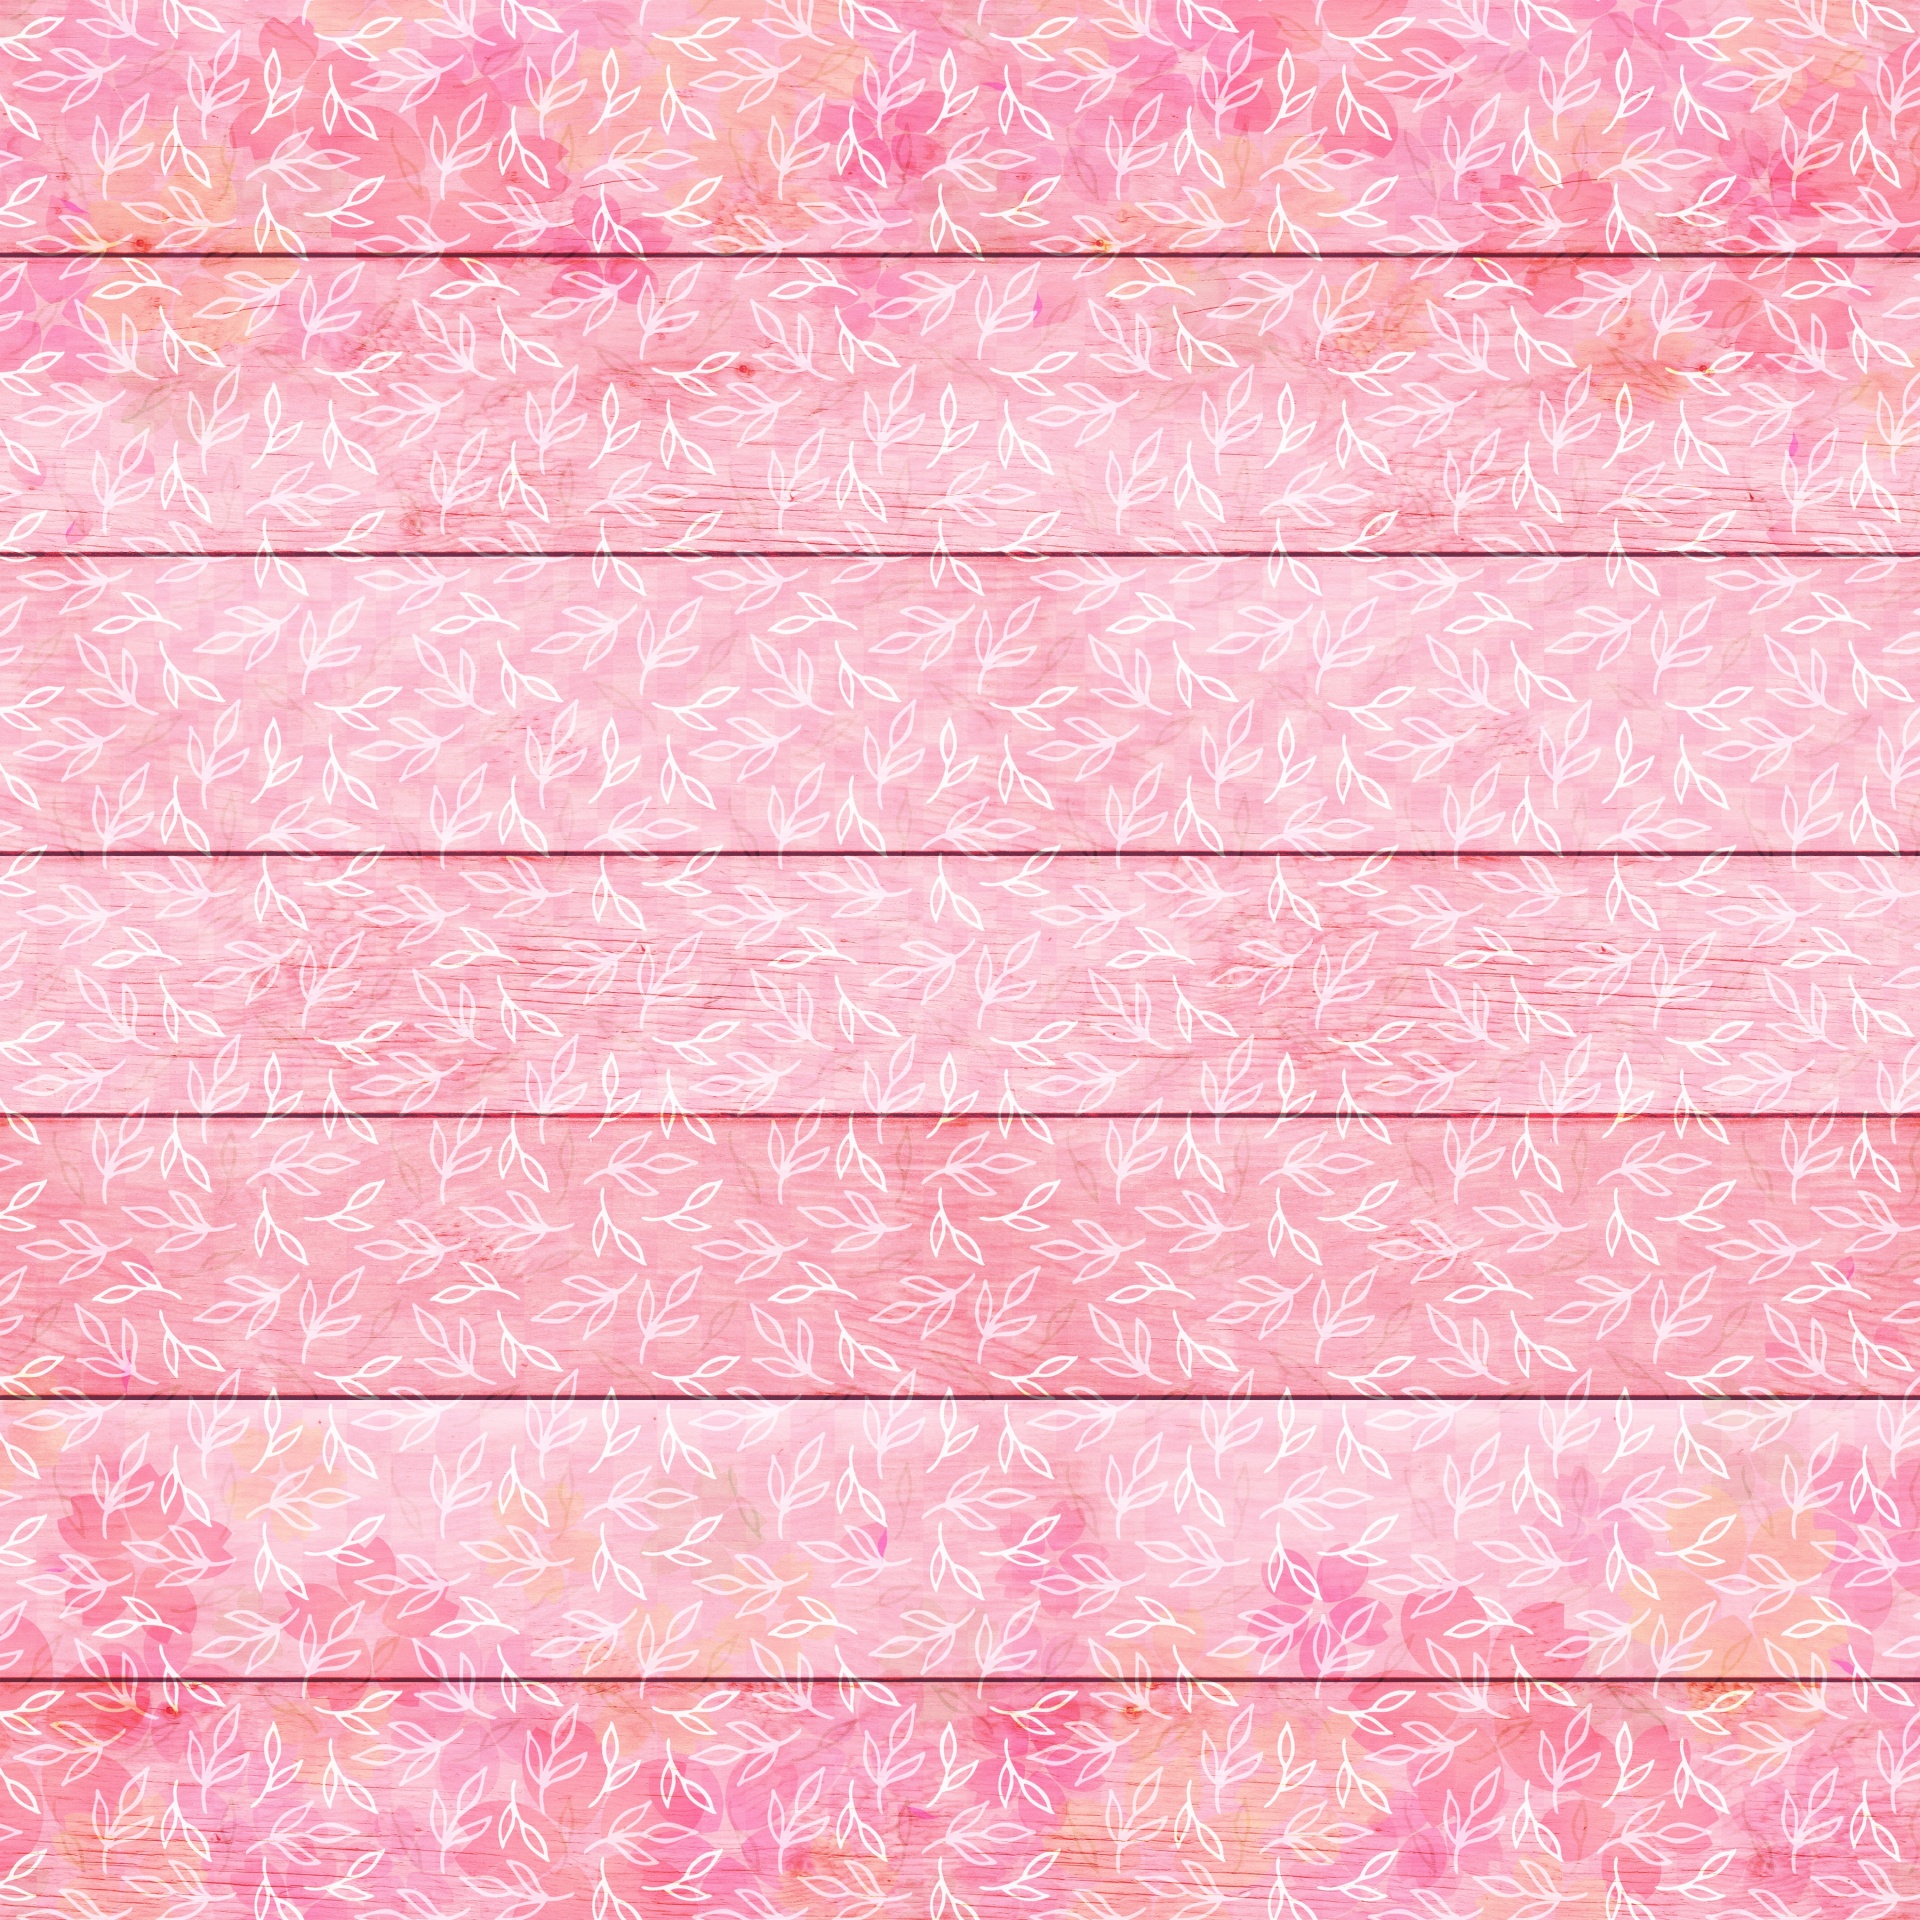 Light Wood Backgrounds with Flowers